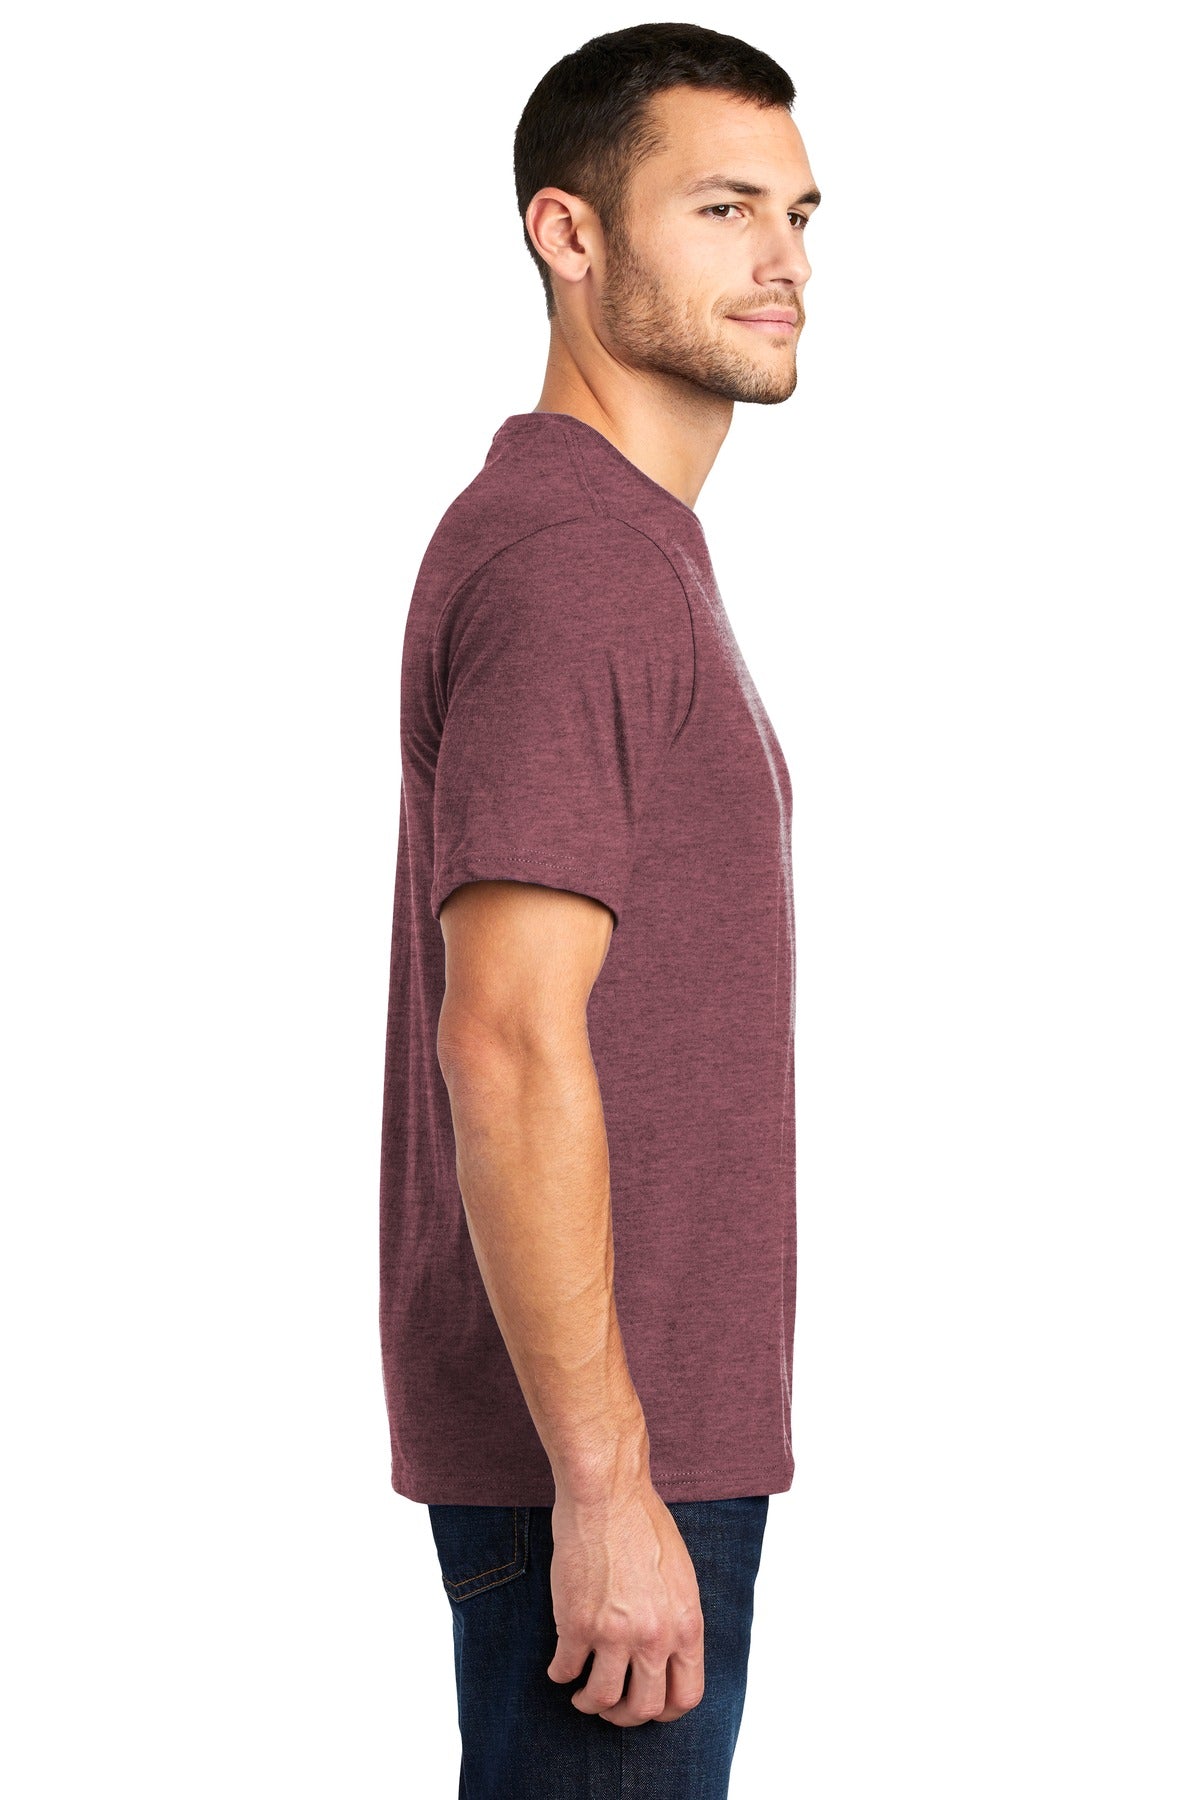 District® Very Important Tee®. DT6000 [Heathered Cardinal] - DFW Impression